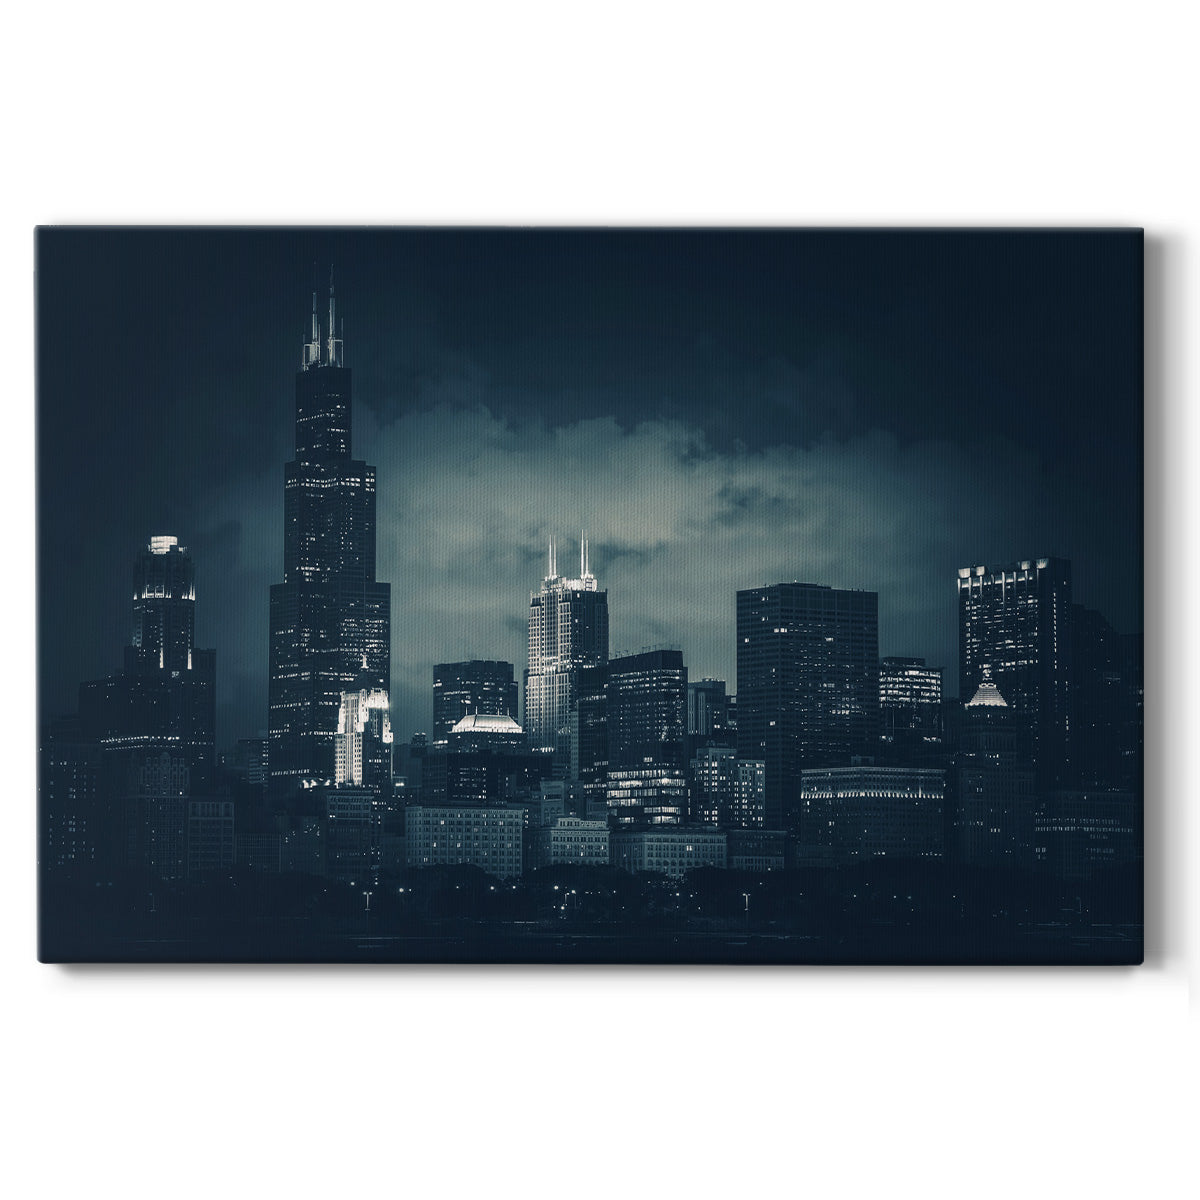 Gotham Chicago - Gallery Wrapped Canvas